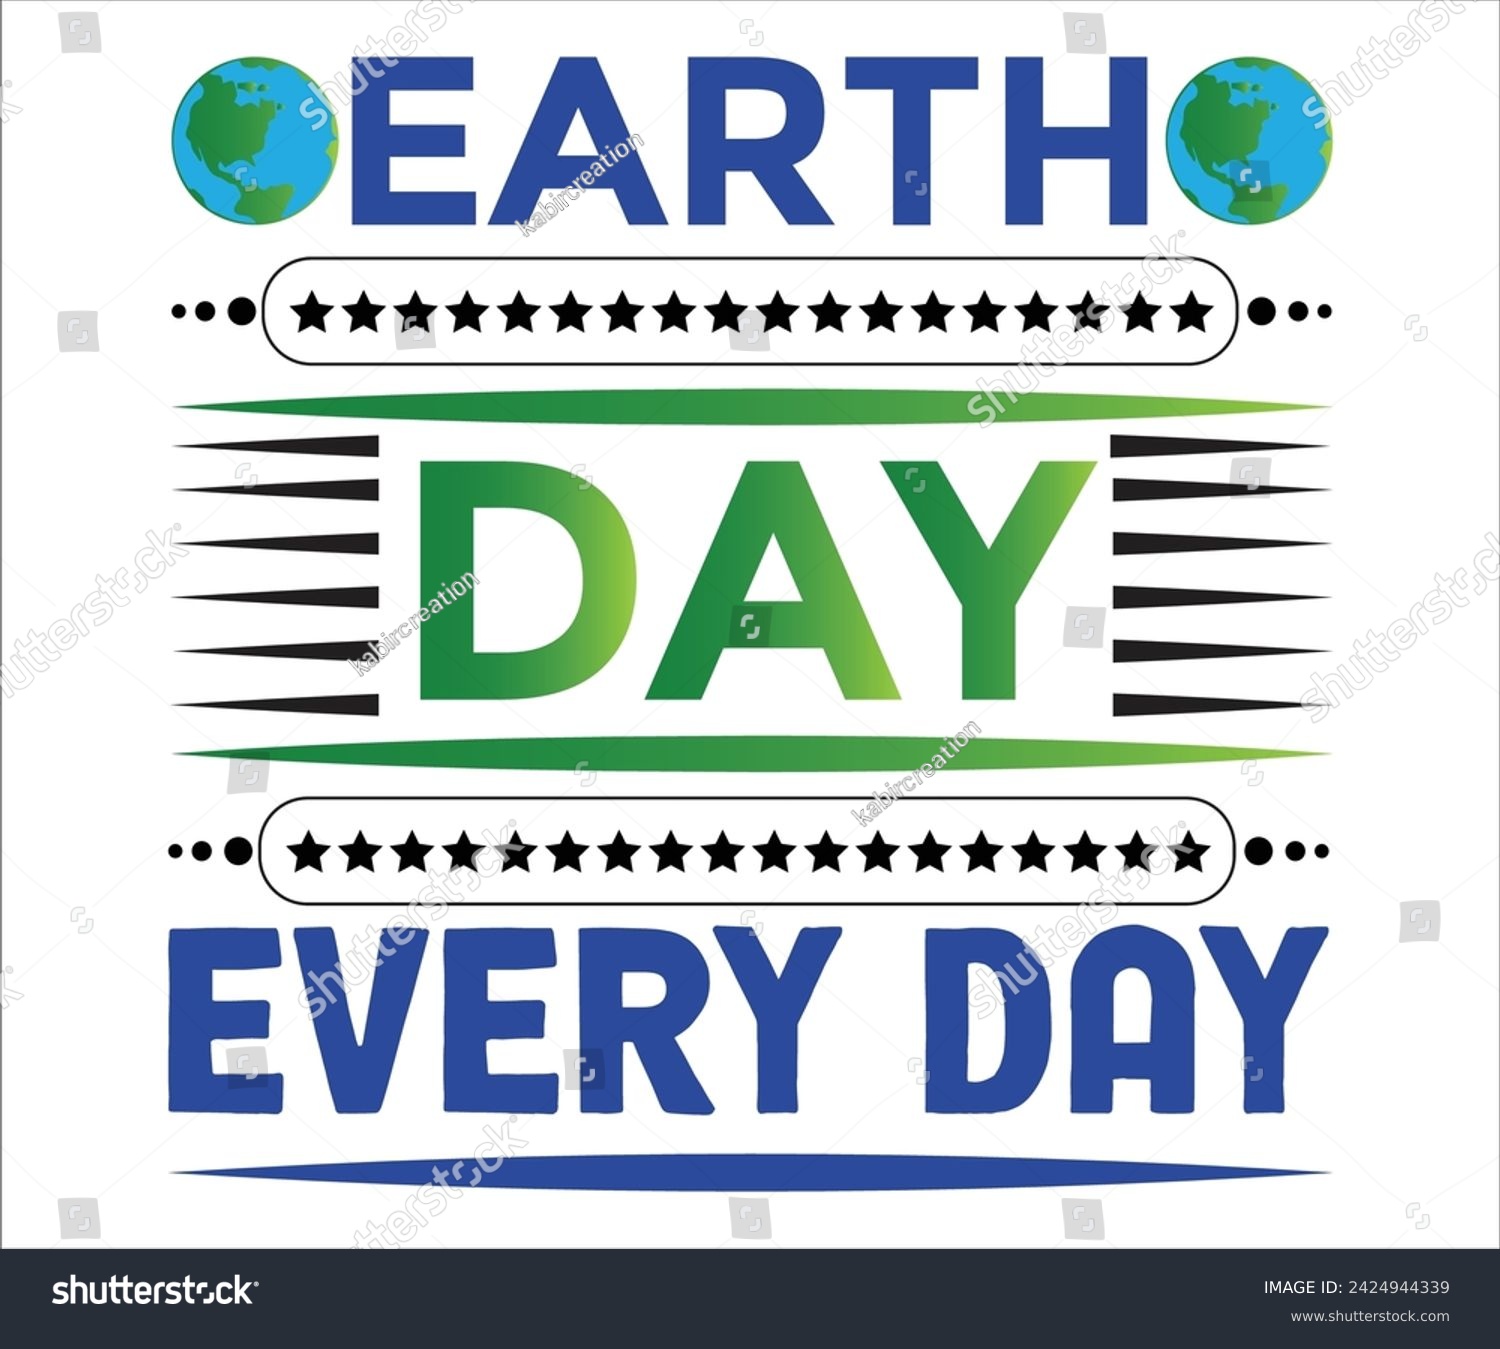 SVG of Earth Day Every Day T-shirt, Happy  day svg,Mother Earth T-shirt, Earth Day Sayings, Environmental Quotes, Cut Files For Cricut svg